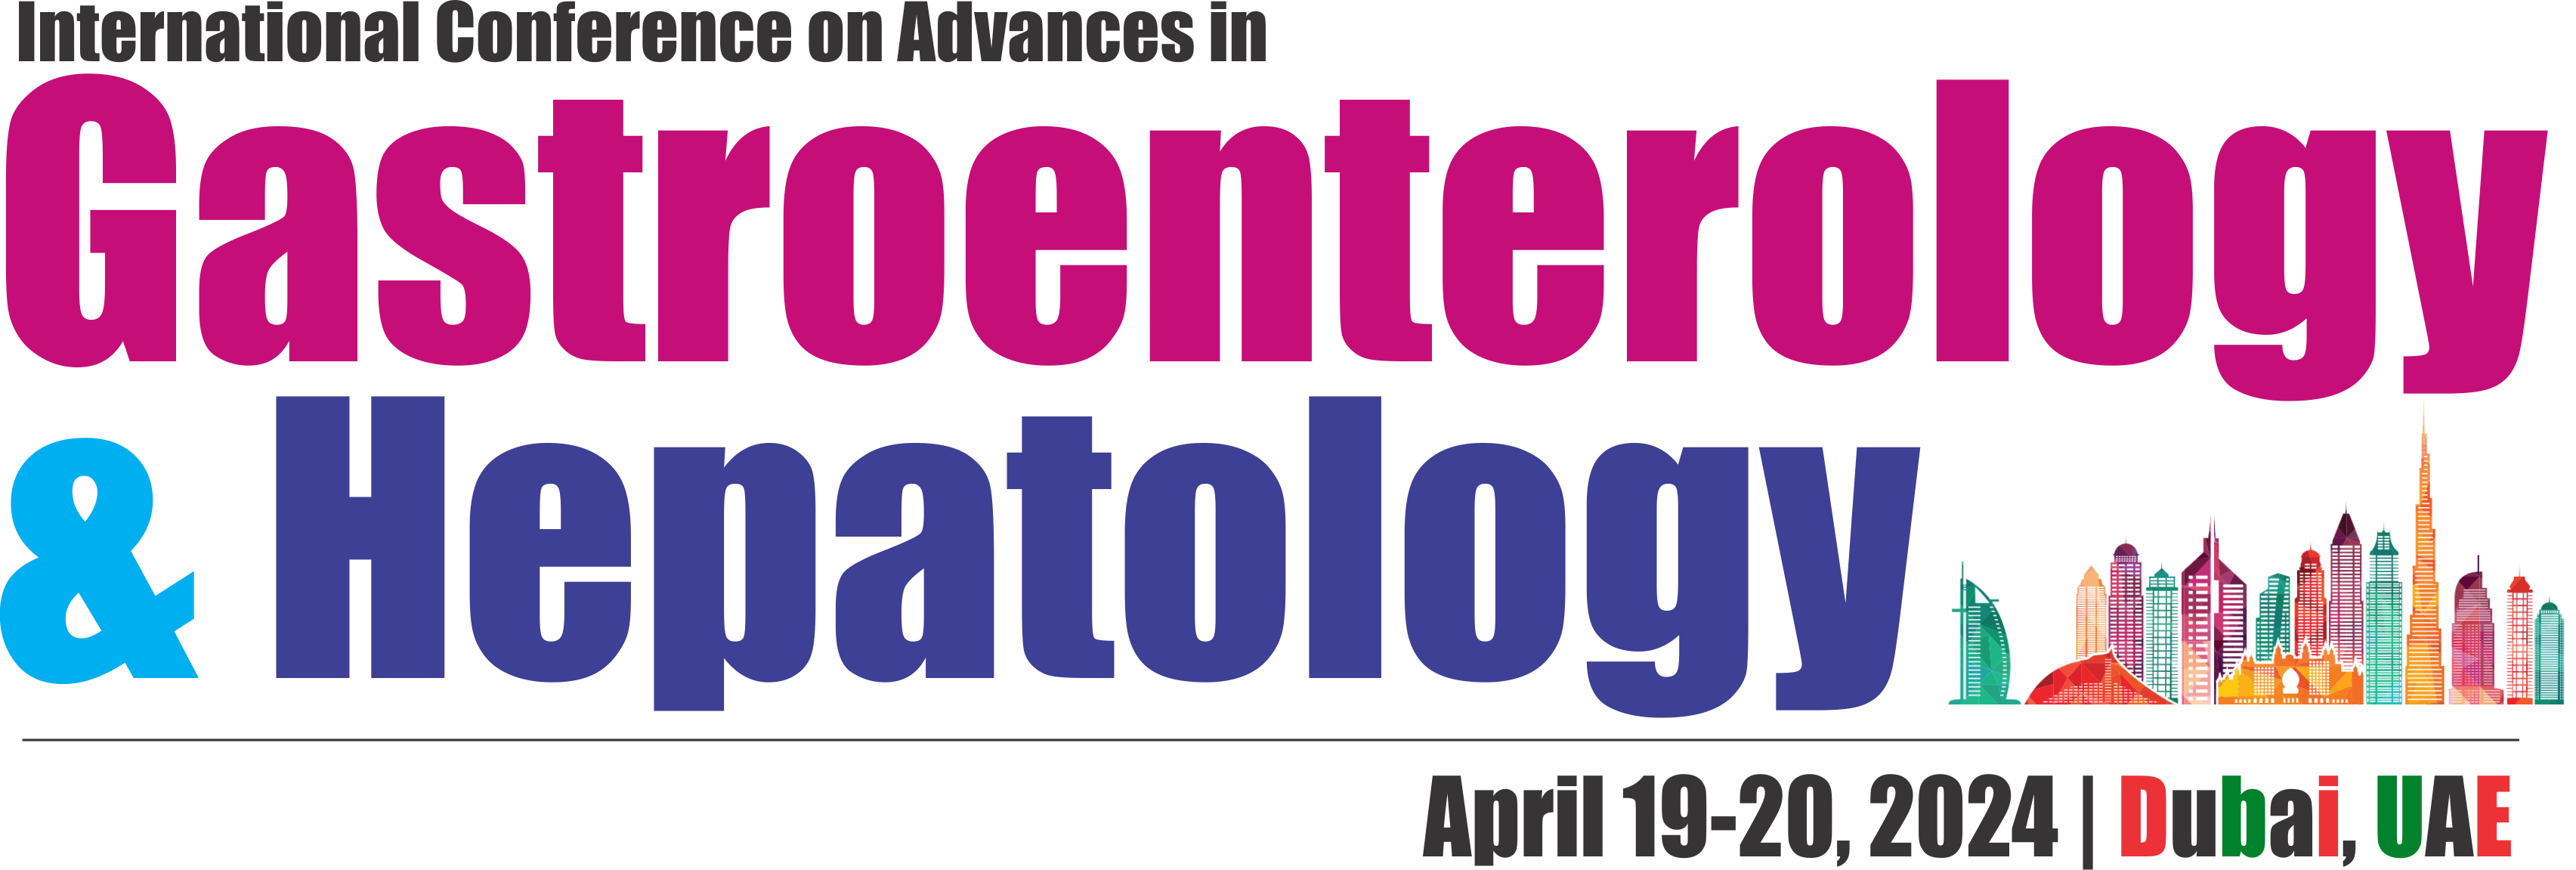 latest research topics in gastroenterology